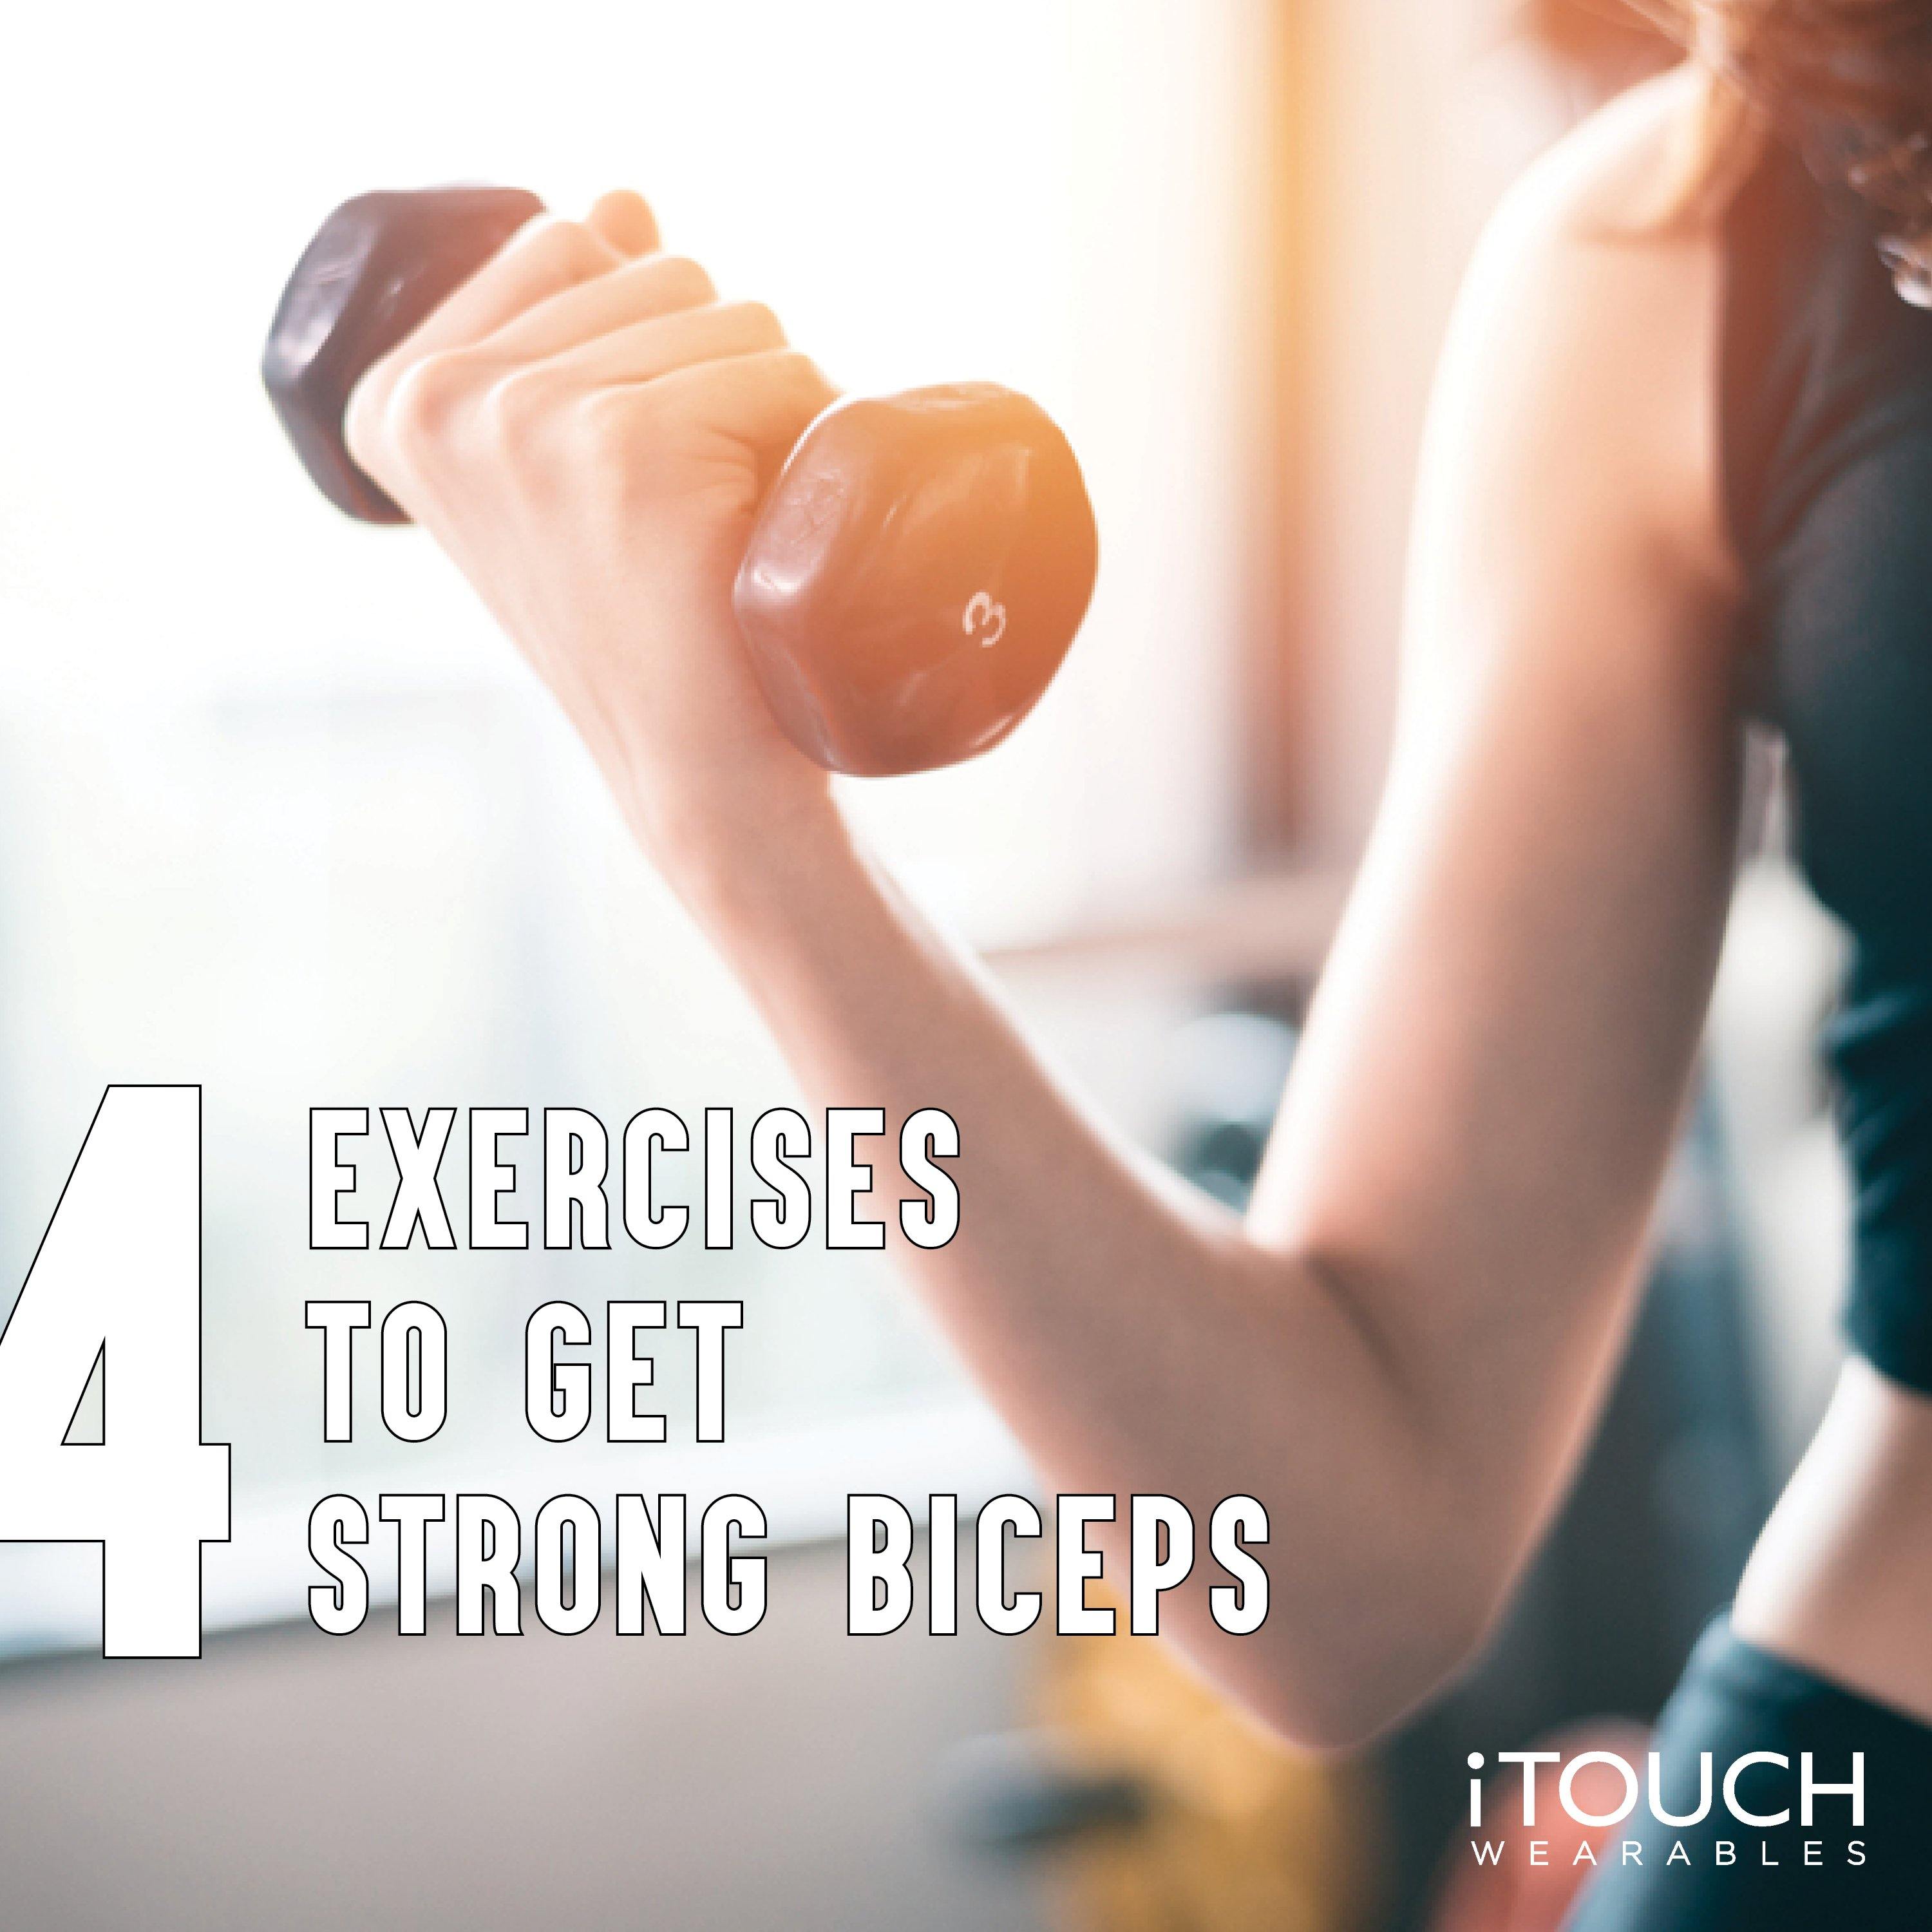 4 Exercises To Get Strong Biceps - iTOUCH Wearables